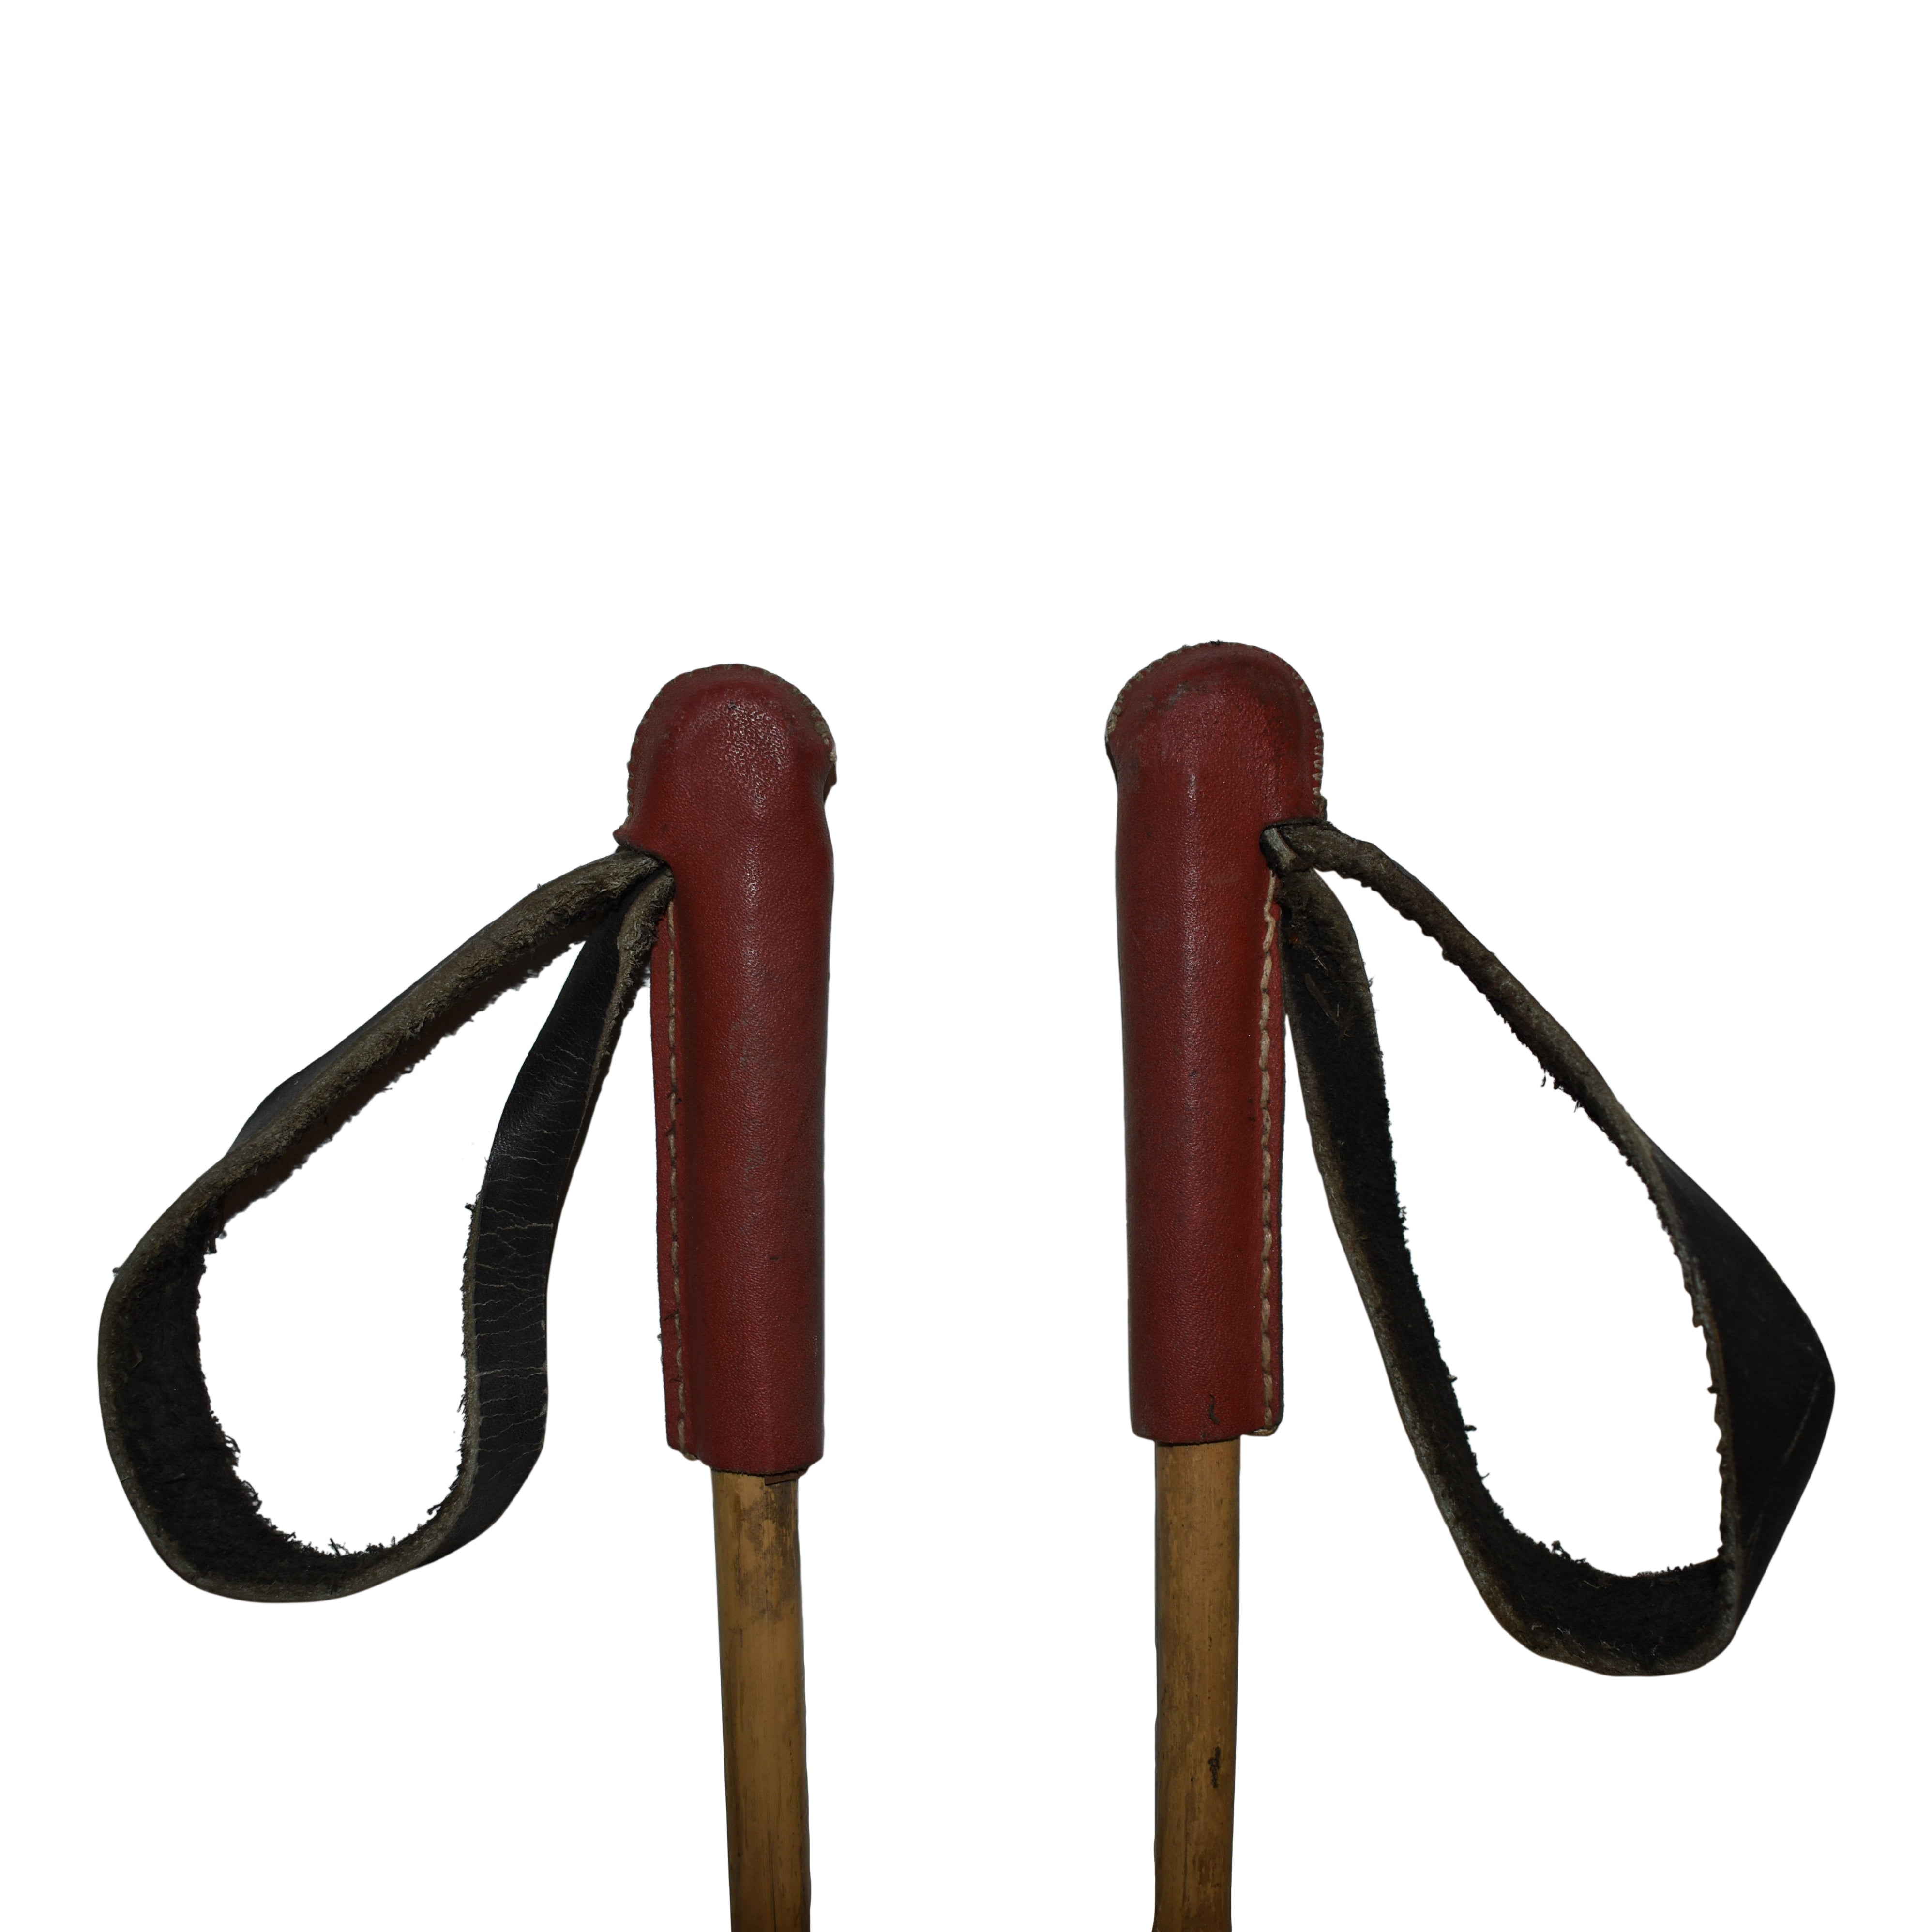 Long Bamboo Ski Poles with Leather Grips and Aluminum Baskets